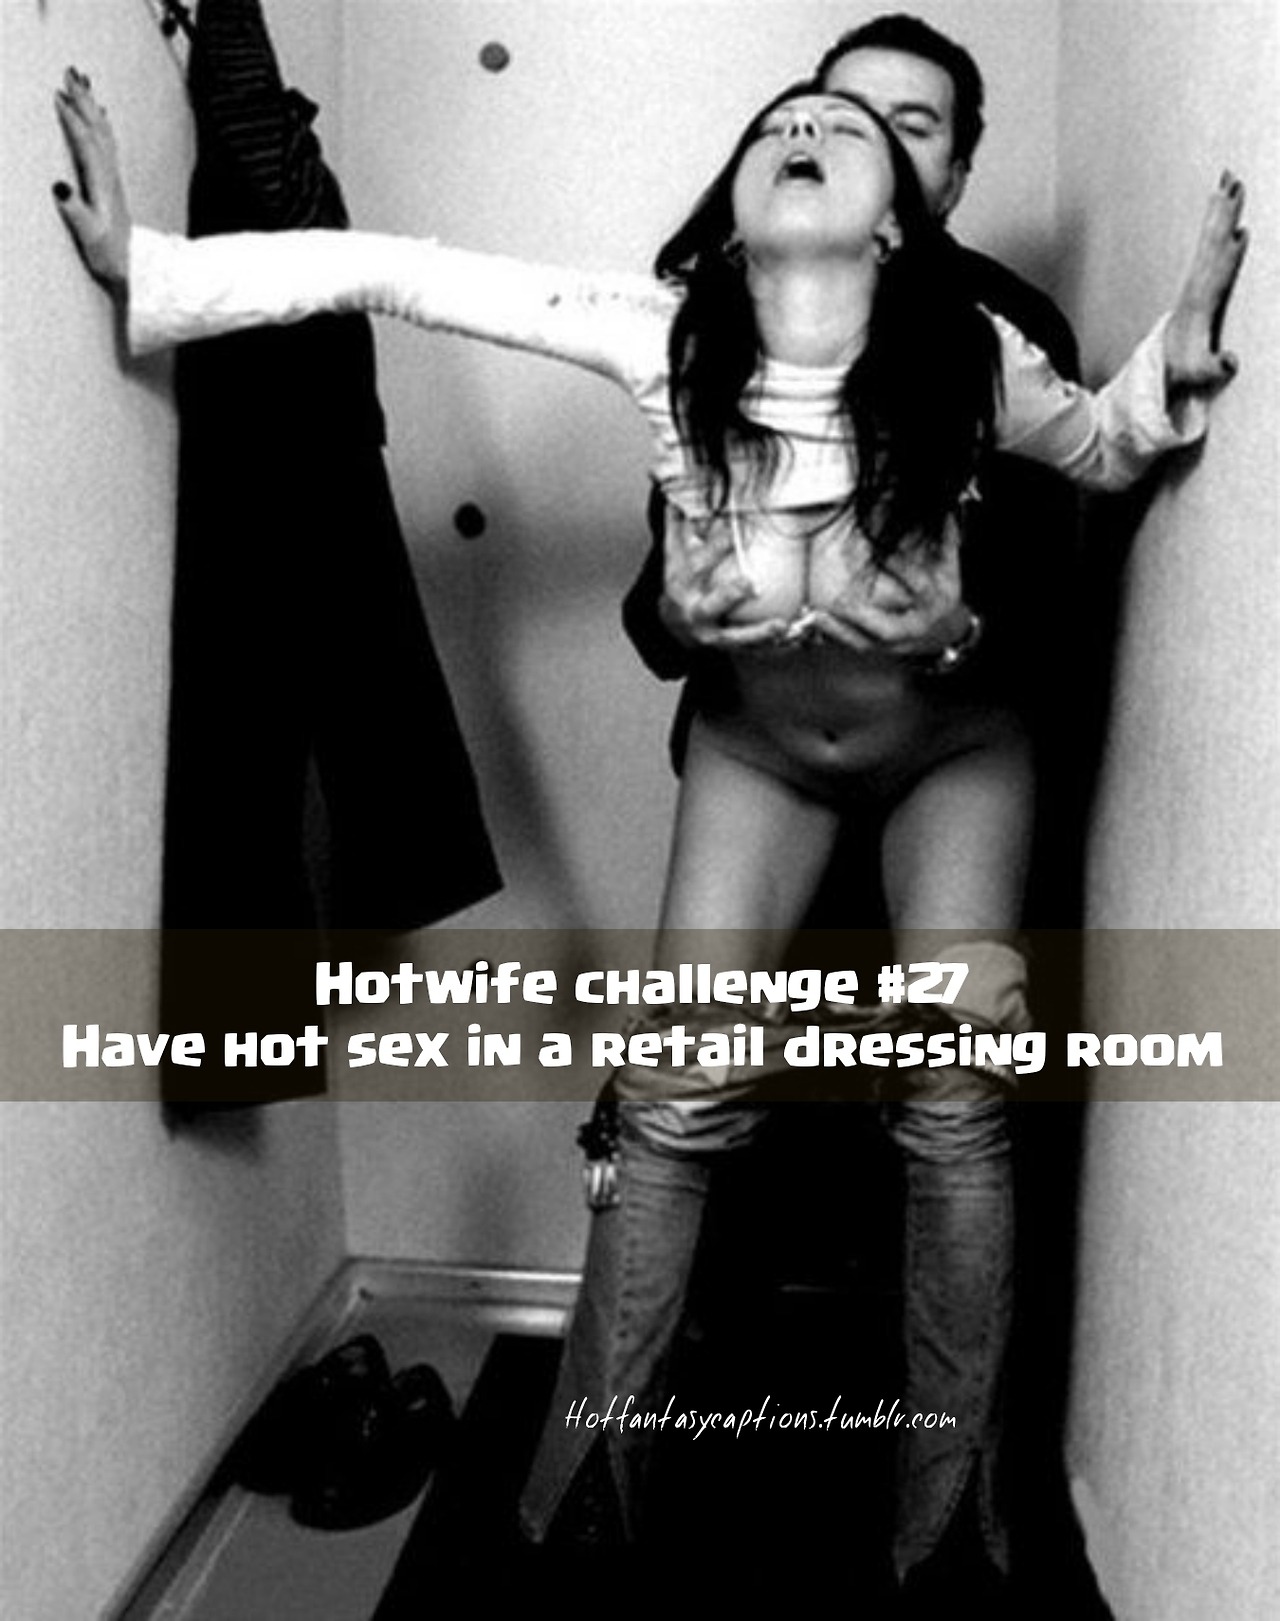 Hotwife challenge #27 - Have hot sex in a dressing room picture image